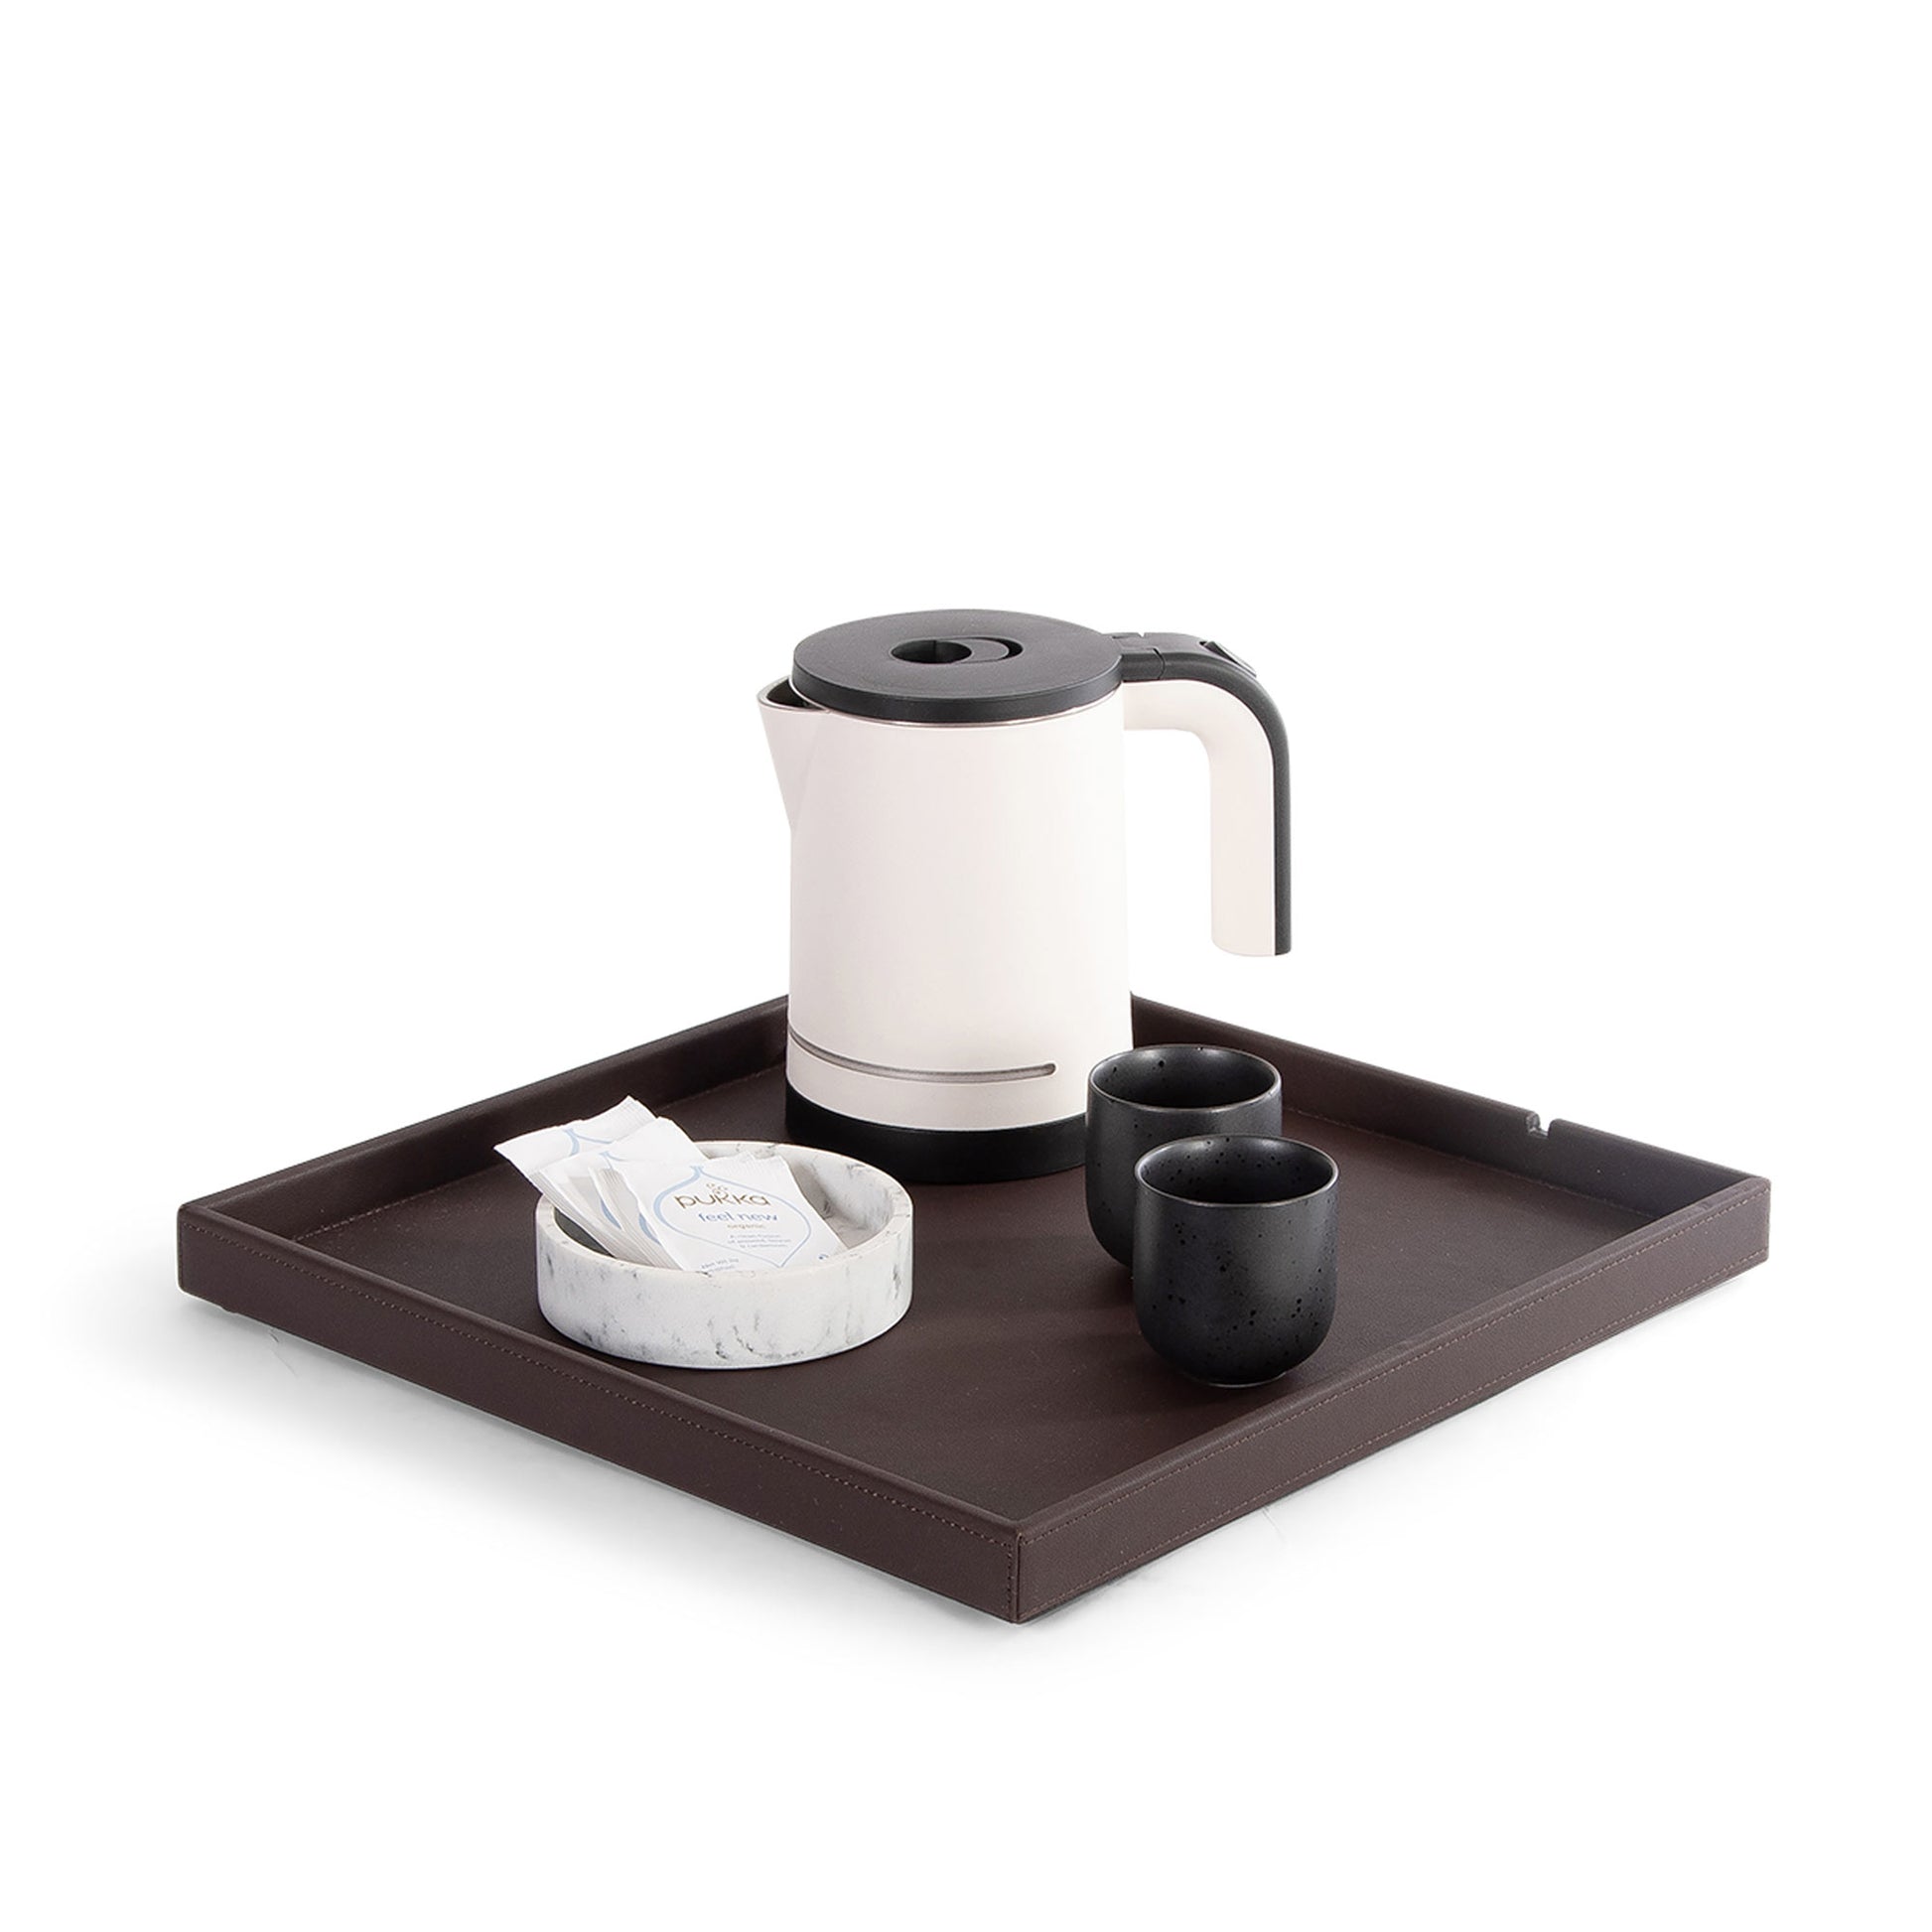 Bentley Fuji kettle tray in brown leather with condiment tray